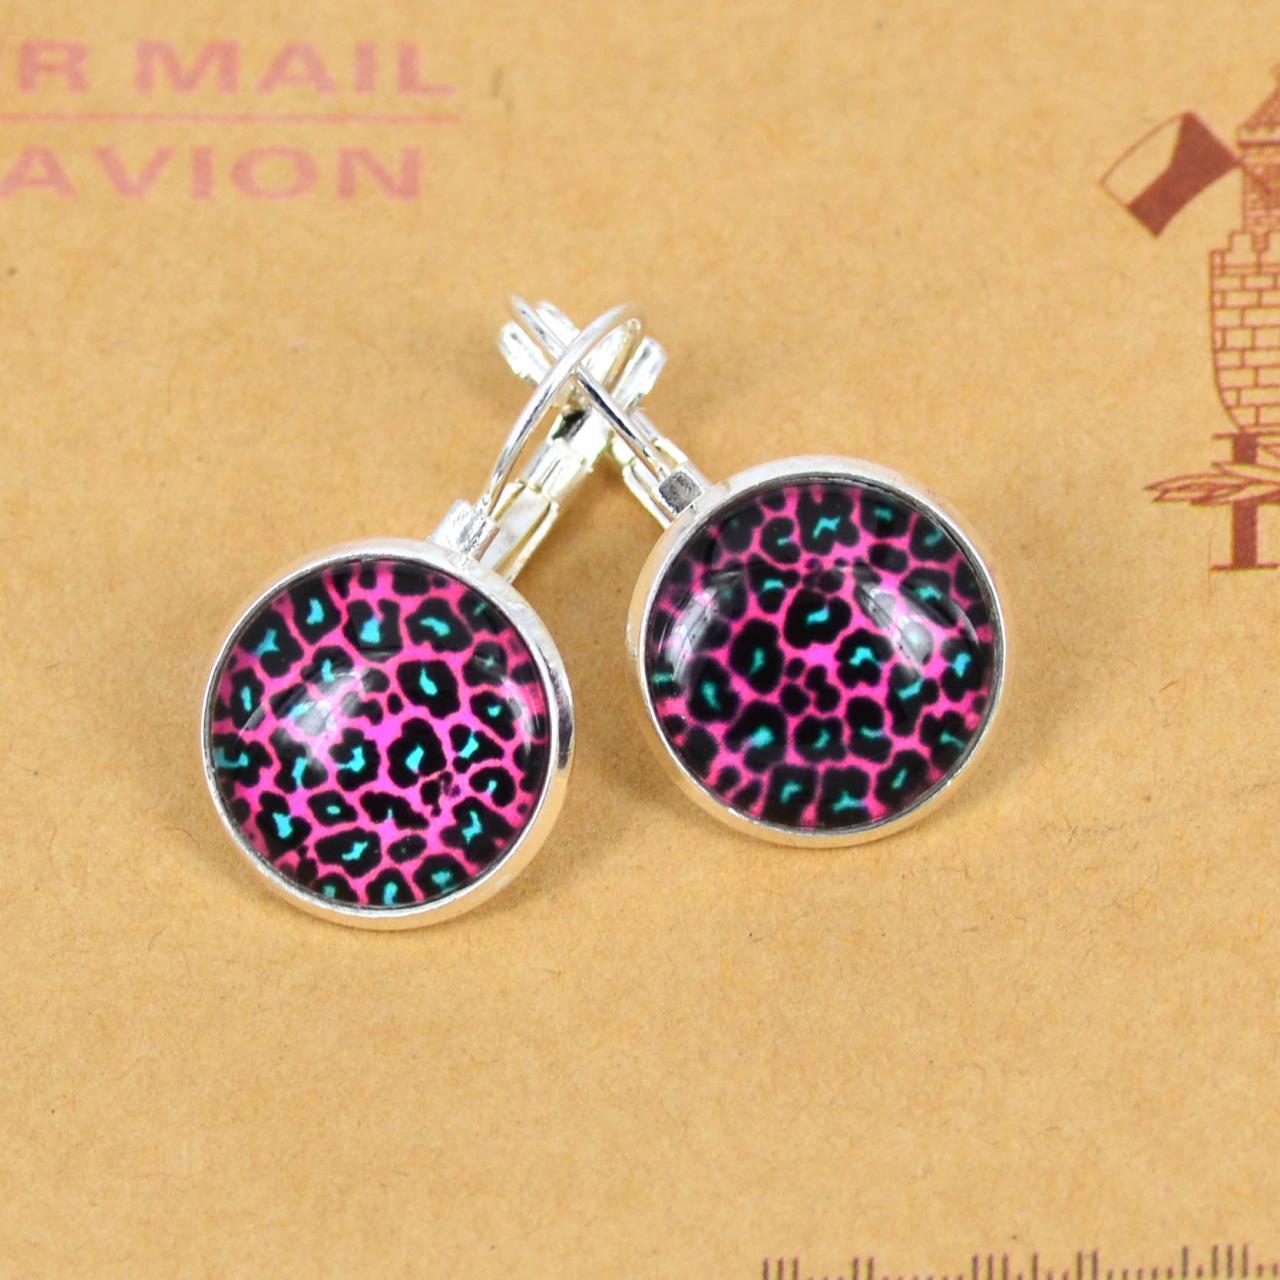 Red Leopard Pictures Silver Plated Pattern Earrings.photo Glass Cabochon French Leverback Dangle Earrings. #ib693